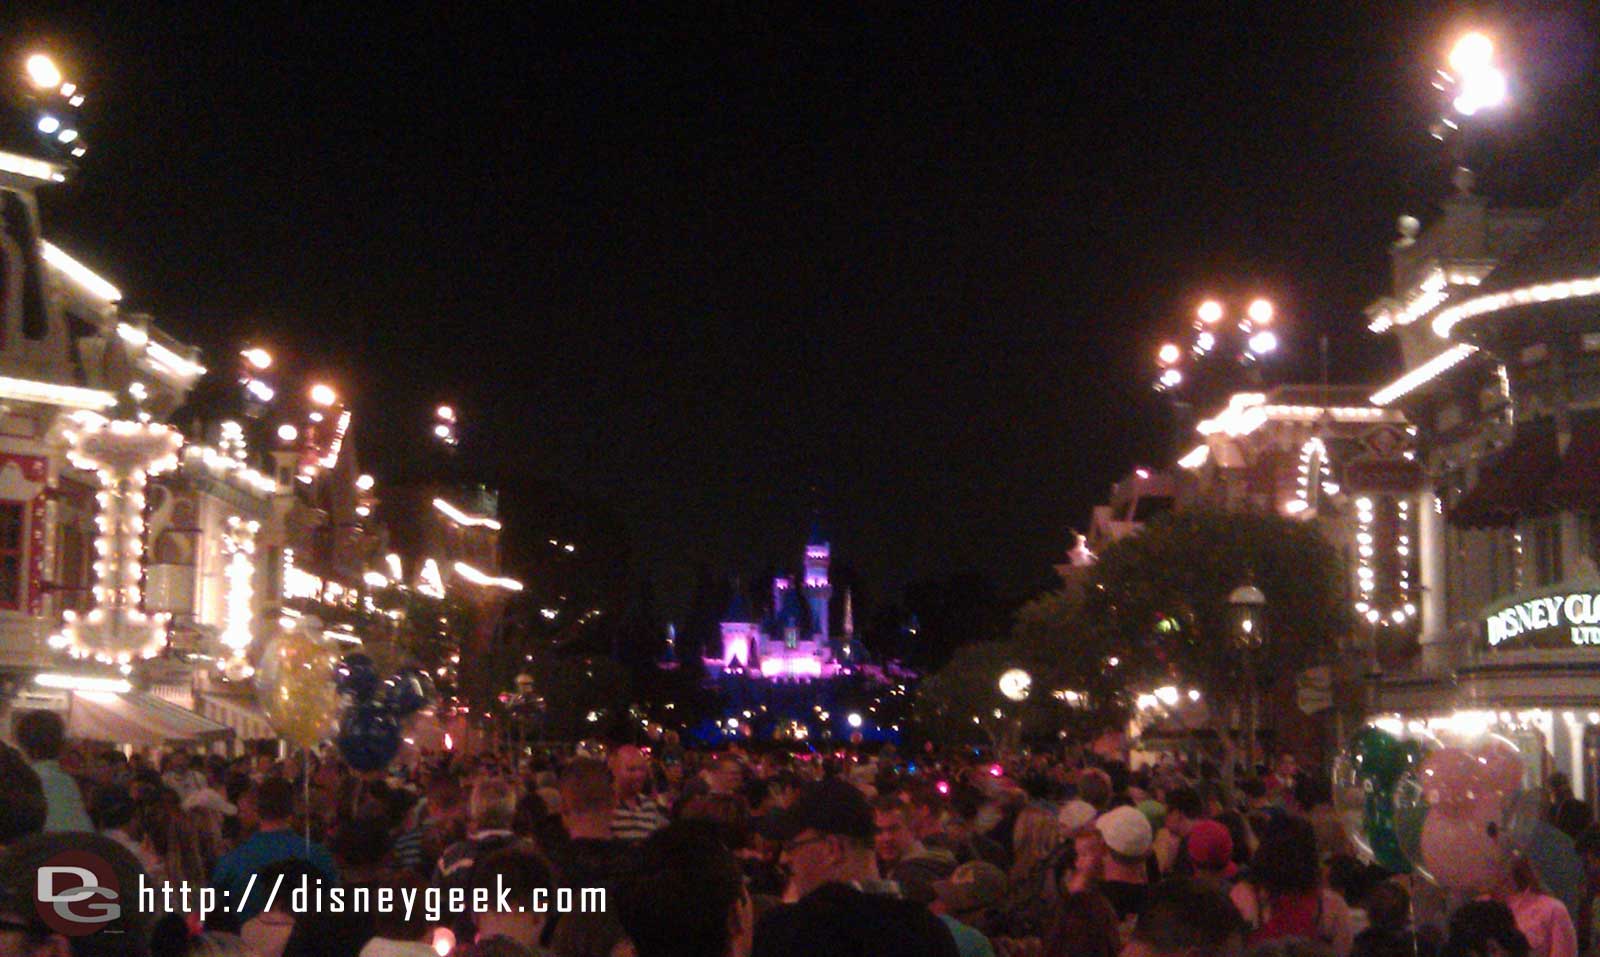 On Main Street waiting for Magical